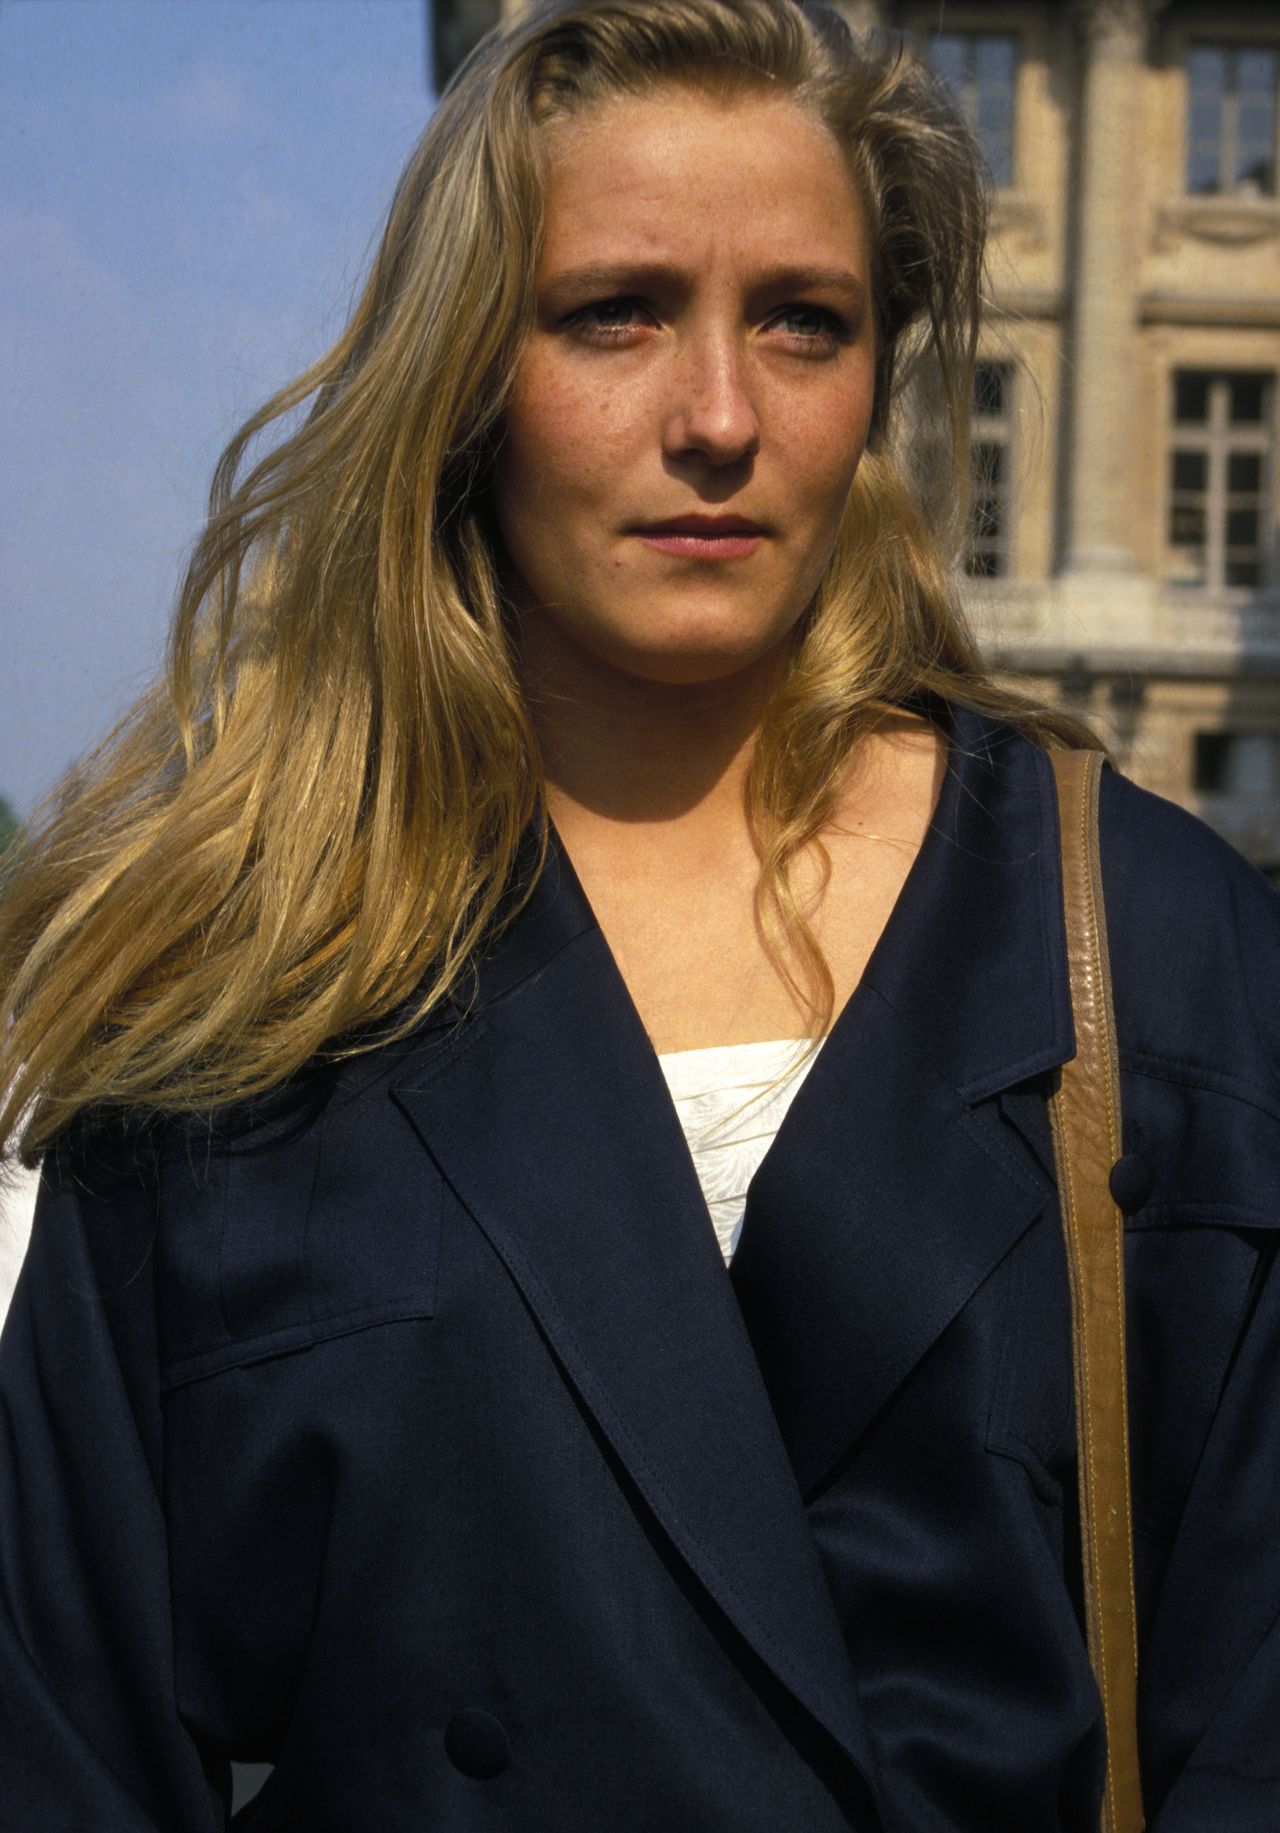 Marine Le Pen in May 1987. She was only 18 years old at the time.